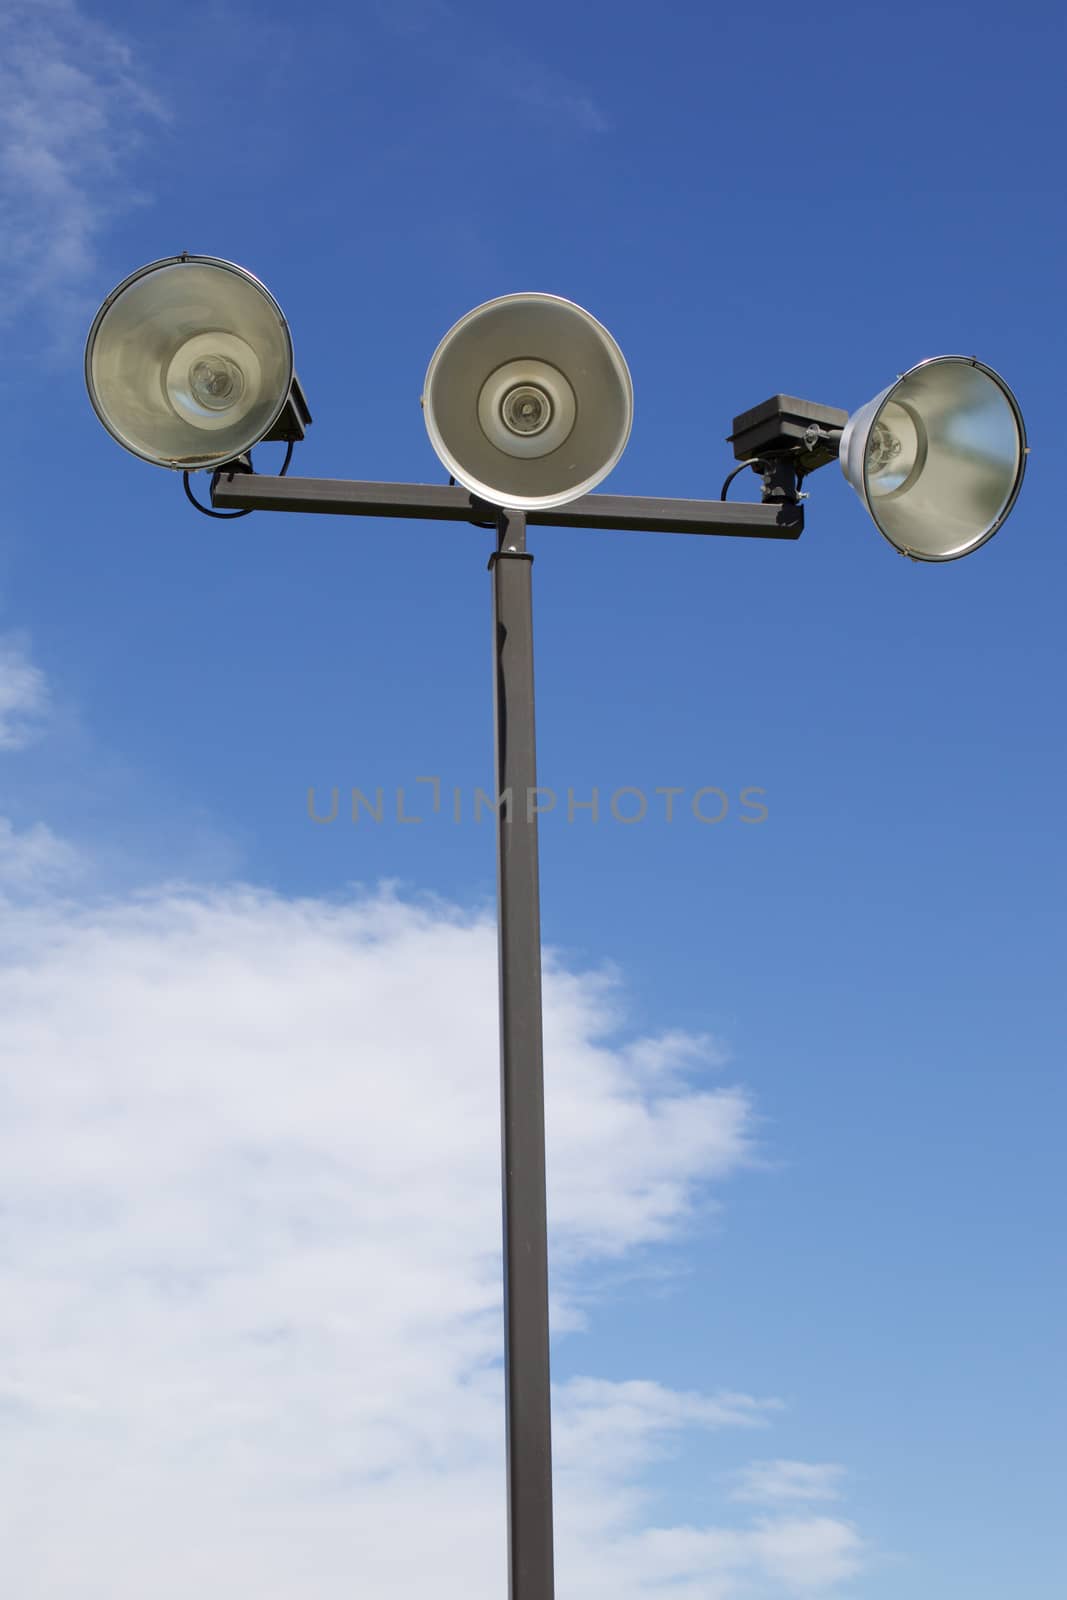 Isolated Outdoor Athletic Court Lights Against The Sky